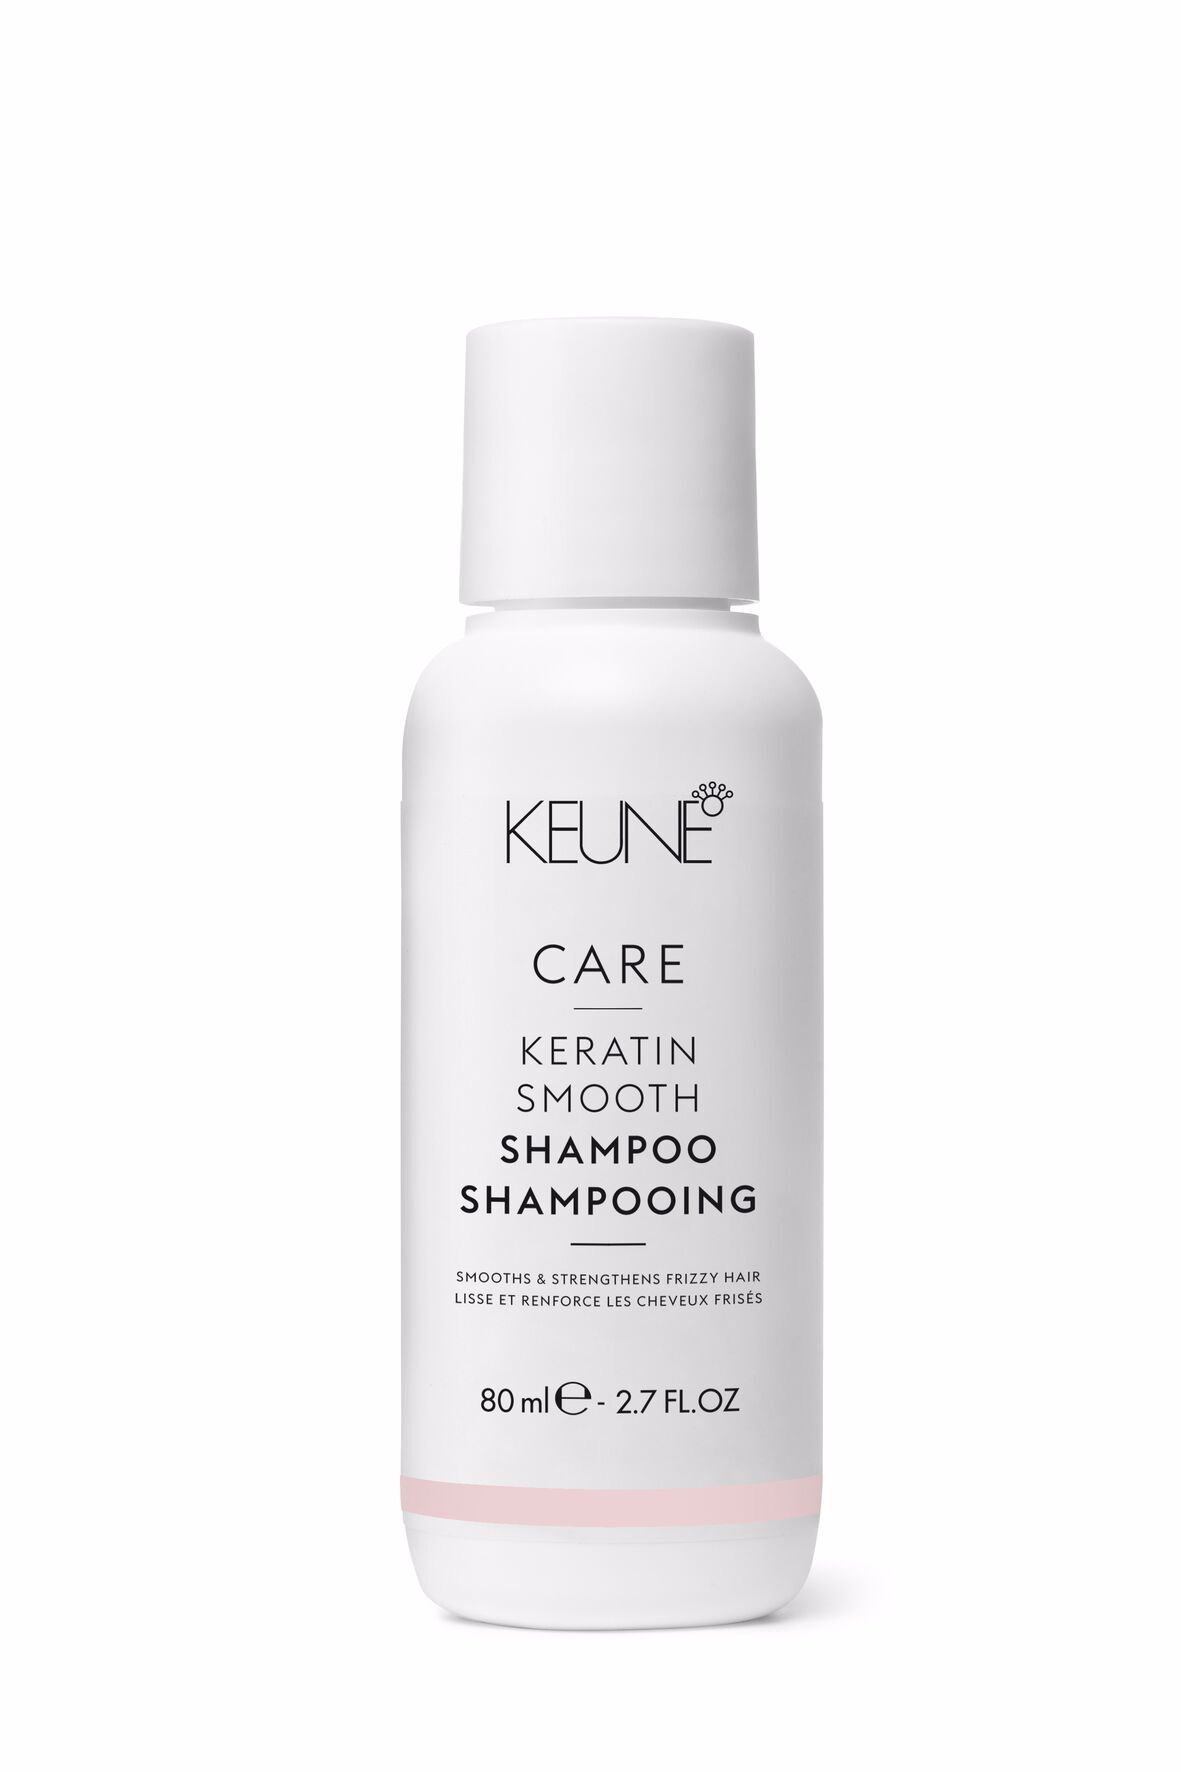 Experience smooth, frizz-free hair thanks to Keratin Smooth Shampoo. This hair care product nourishes, moisturizes, and strengthens dry hair. Explore the advantages of keratin. Available on keune.ch.